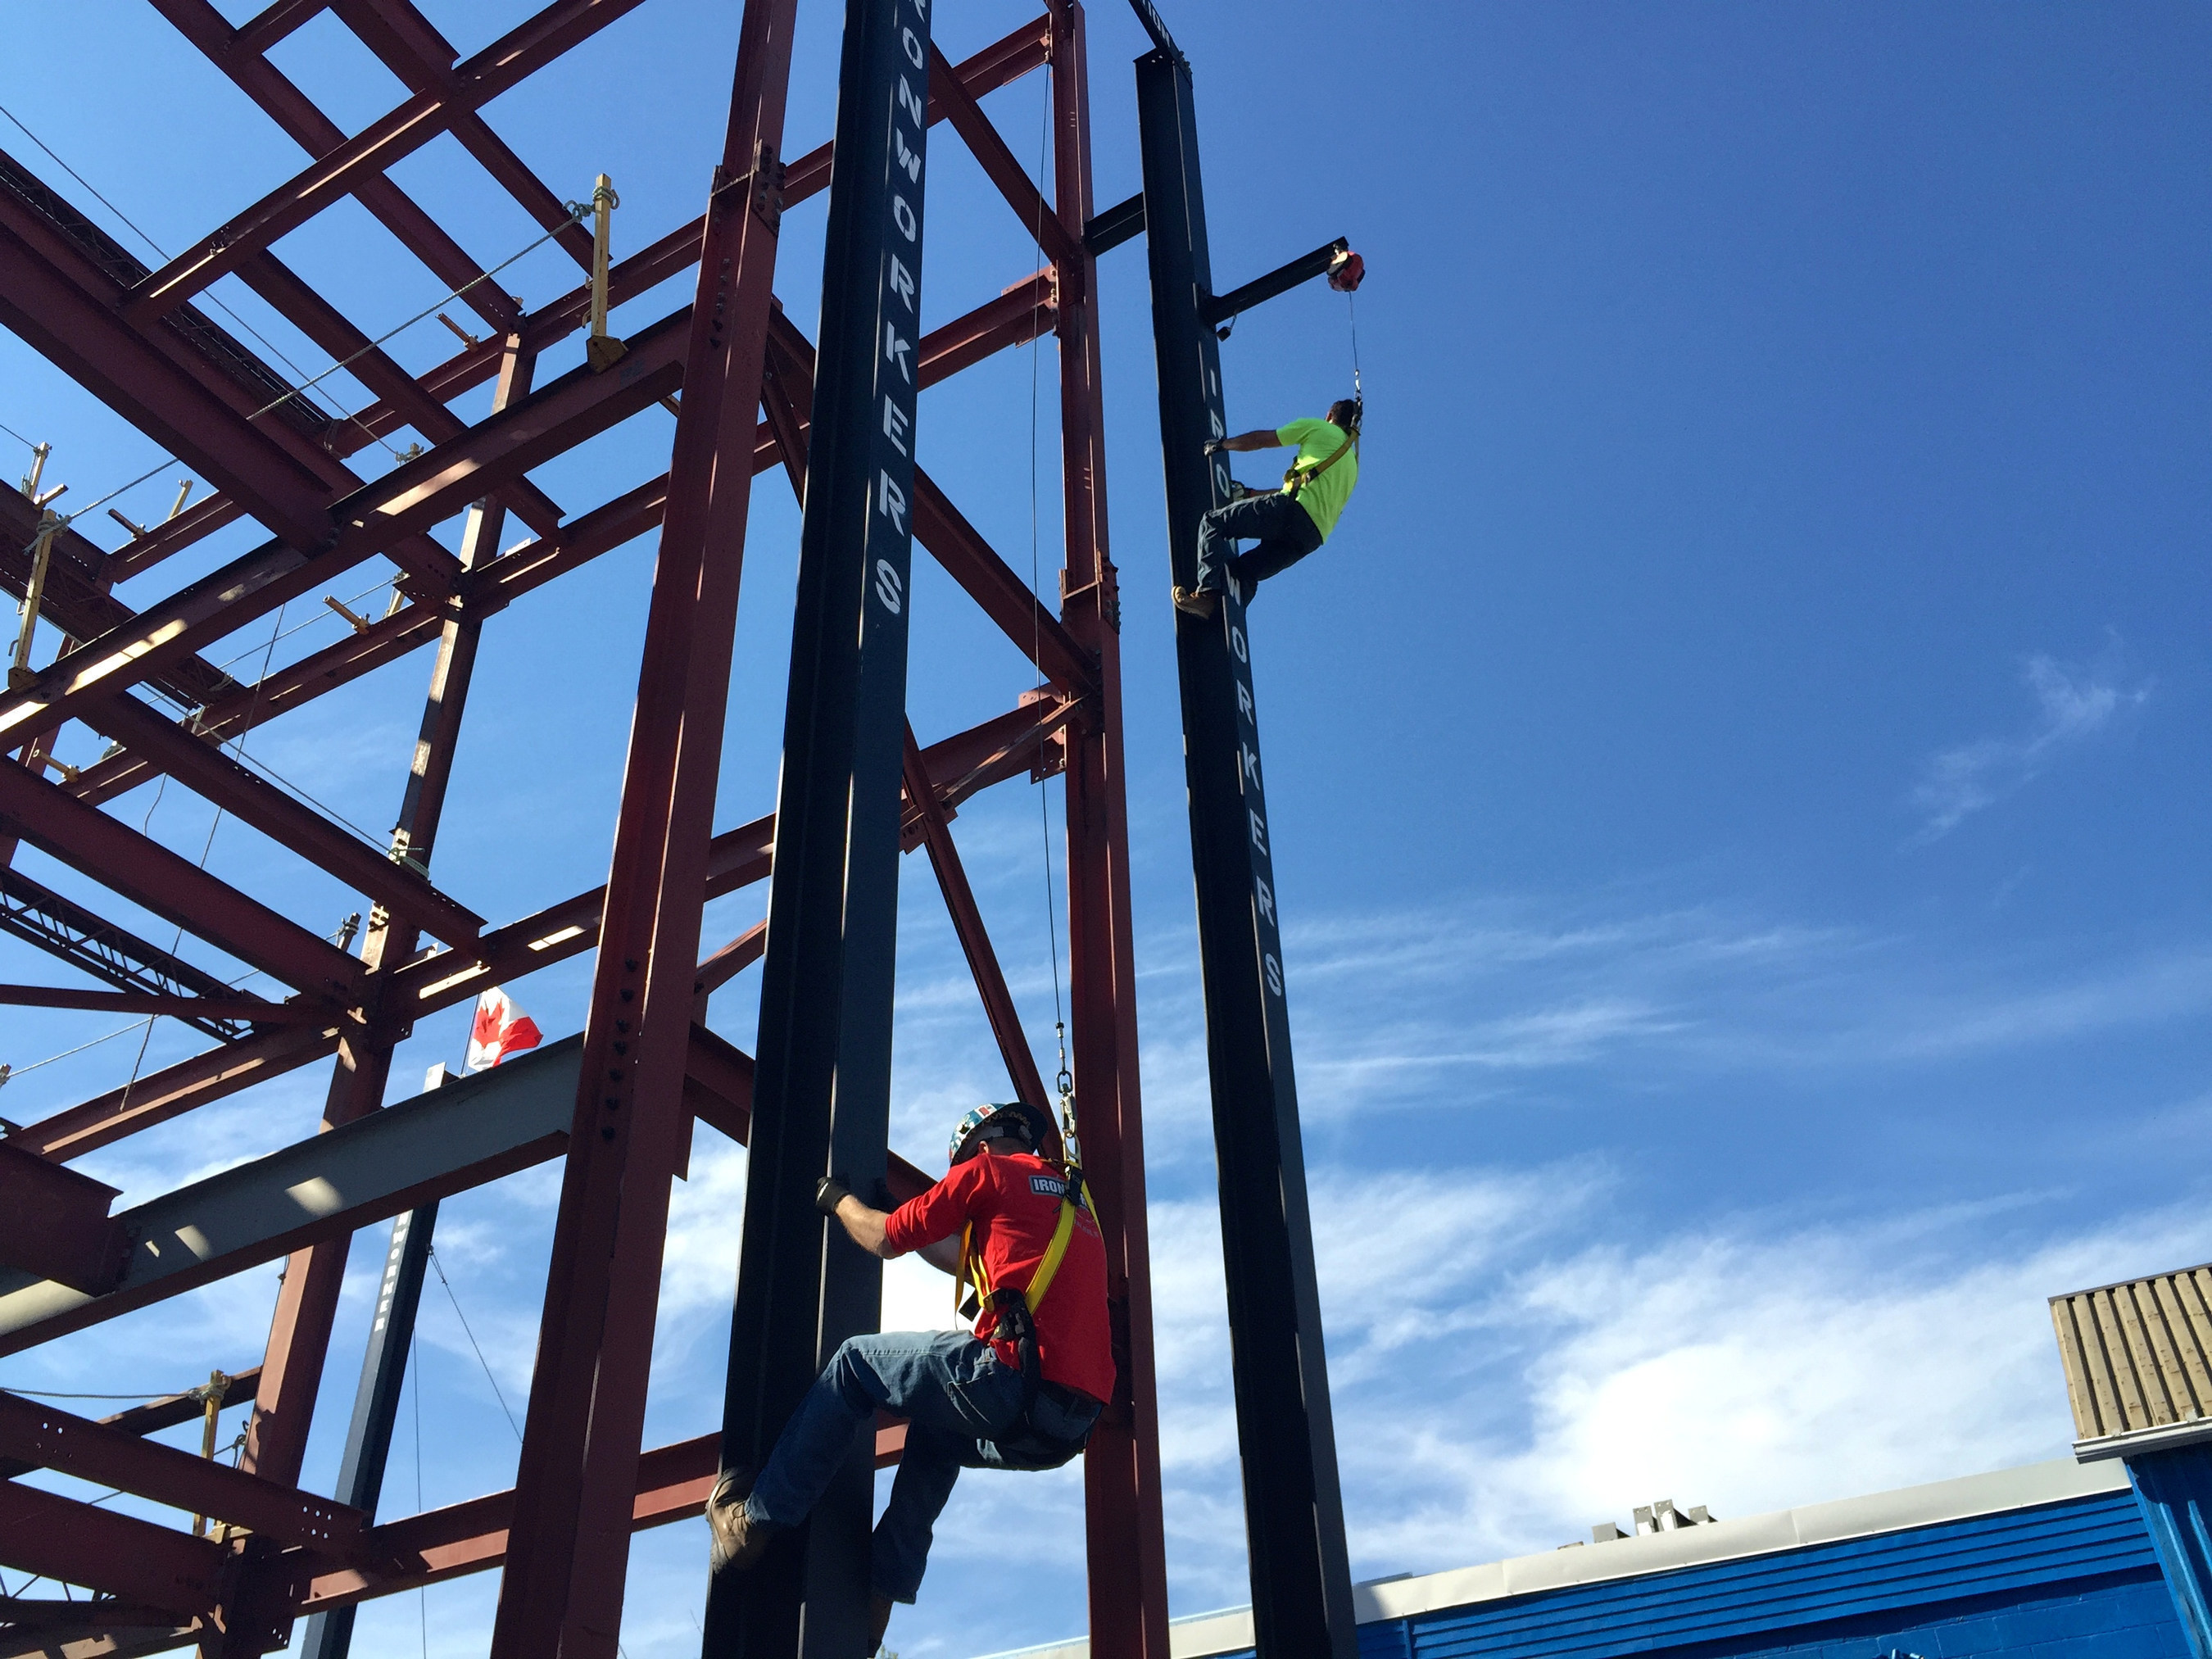 Race to the top in the Ironworker Apprentice column climb. (PRNewsFoto/Iron Workers Union)